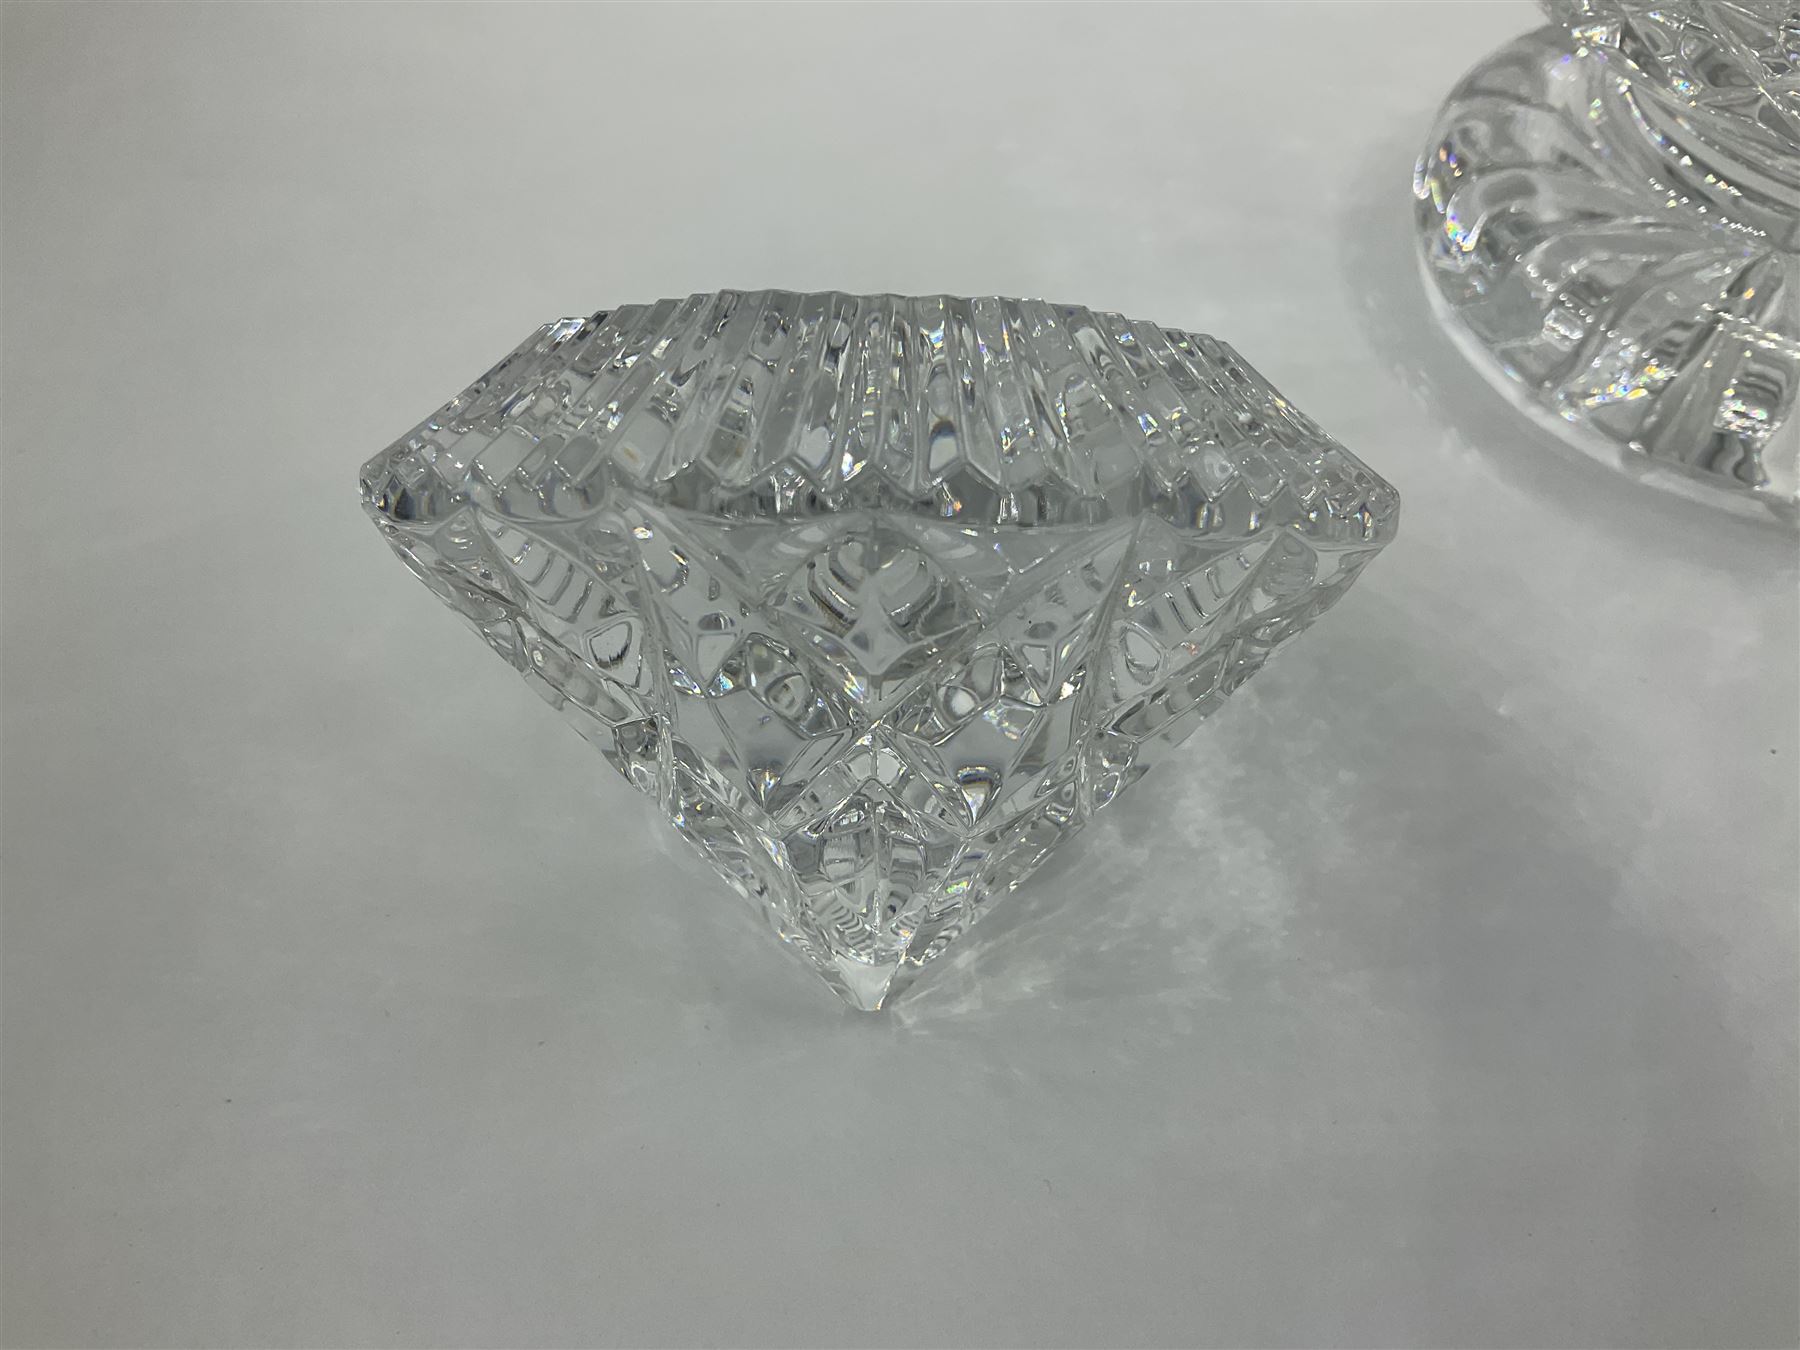 Waterford Crystal Coleen pattern cut glass decanter and Waterford cut glass octagonal pyramid shaped - Image 3 of 8